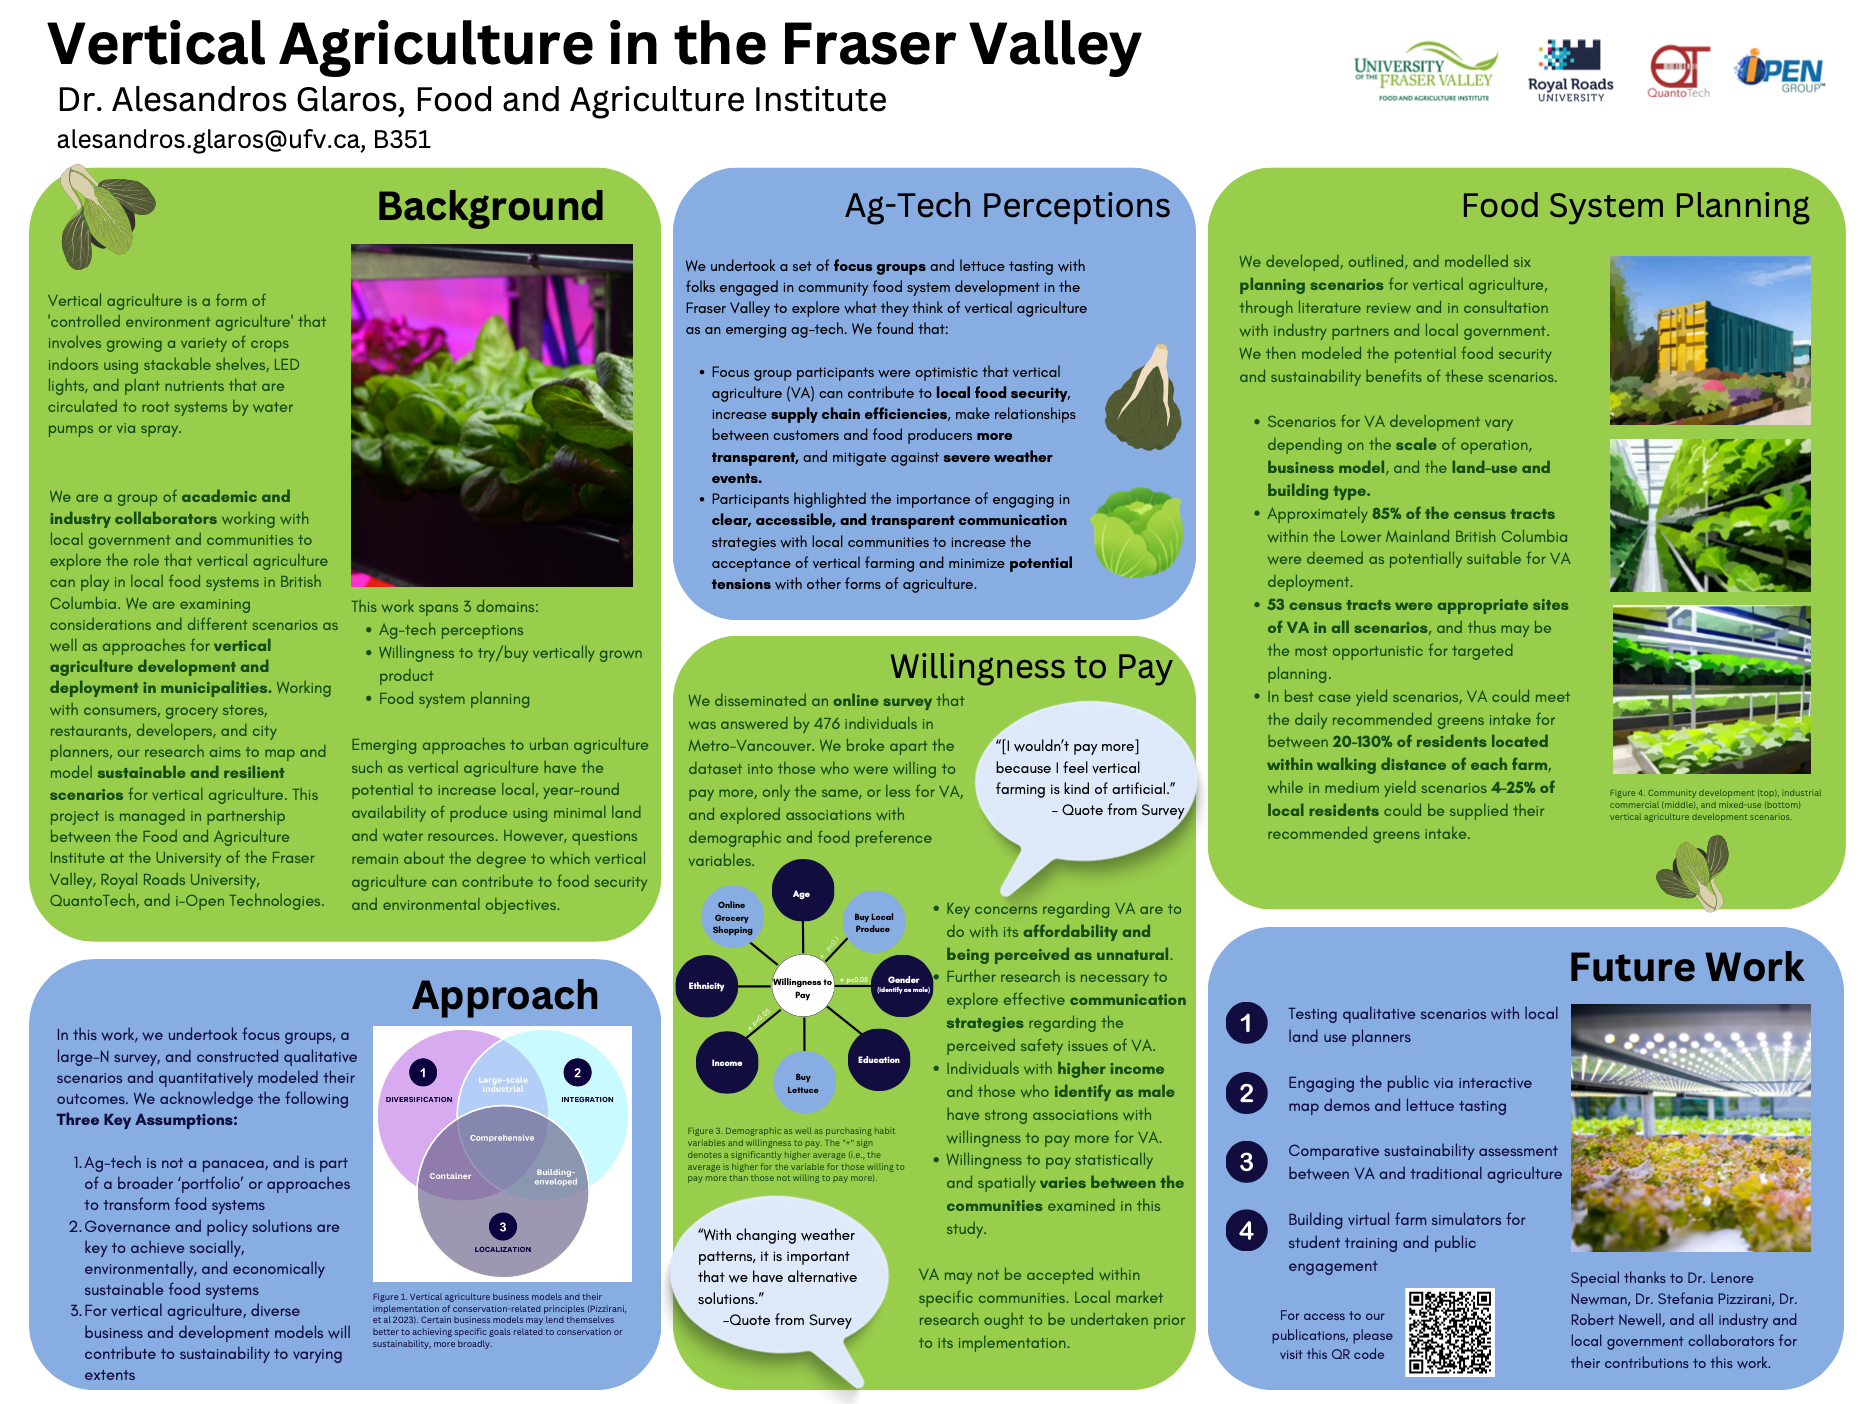 Planning for Ag-Tech A case study of vertical agriculture in the Fraser Valley